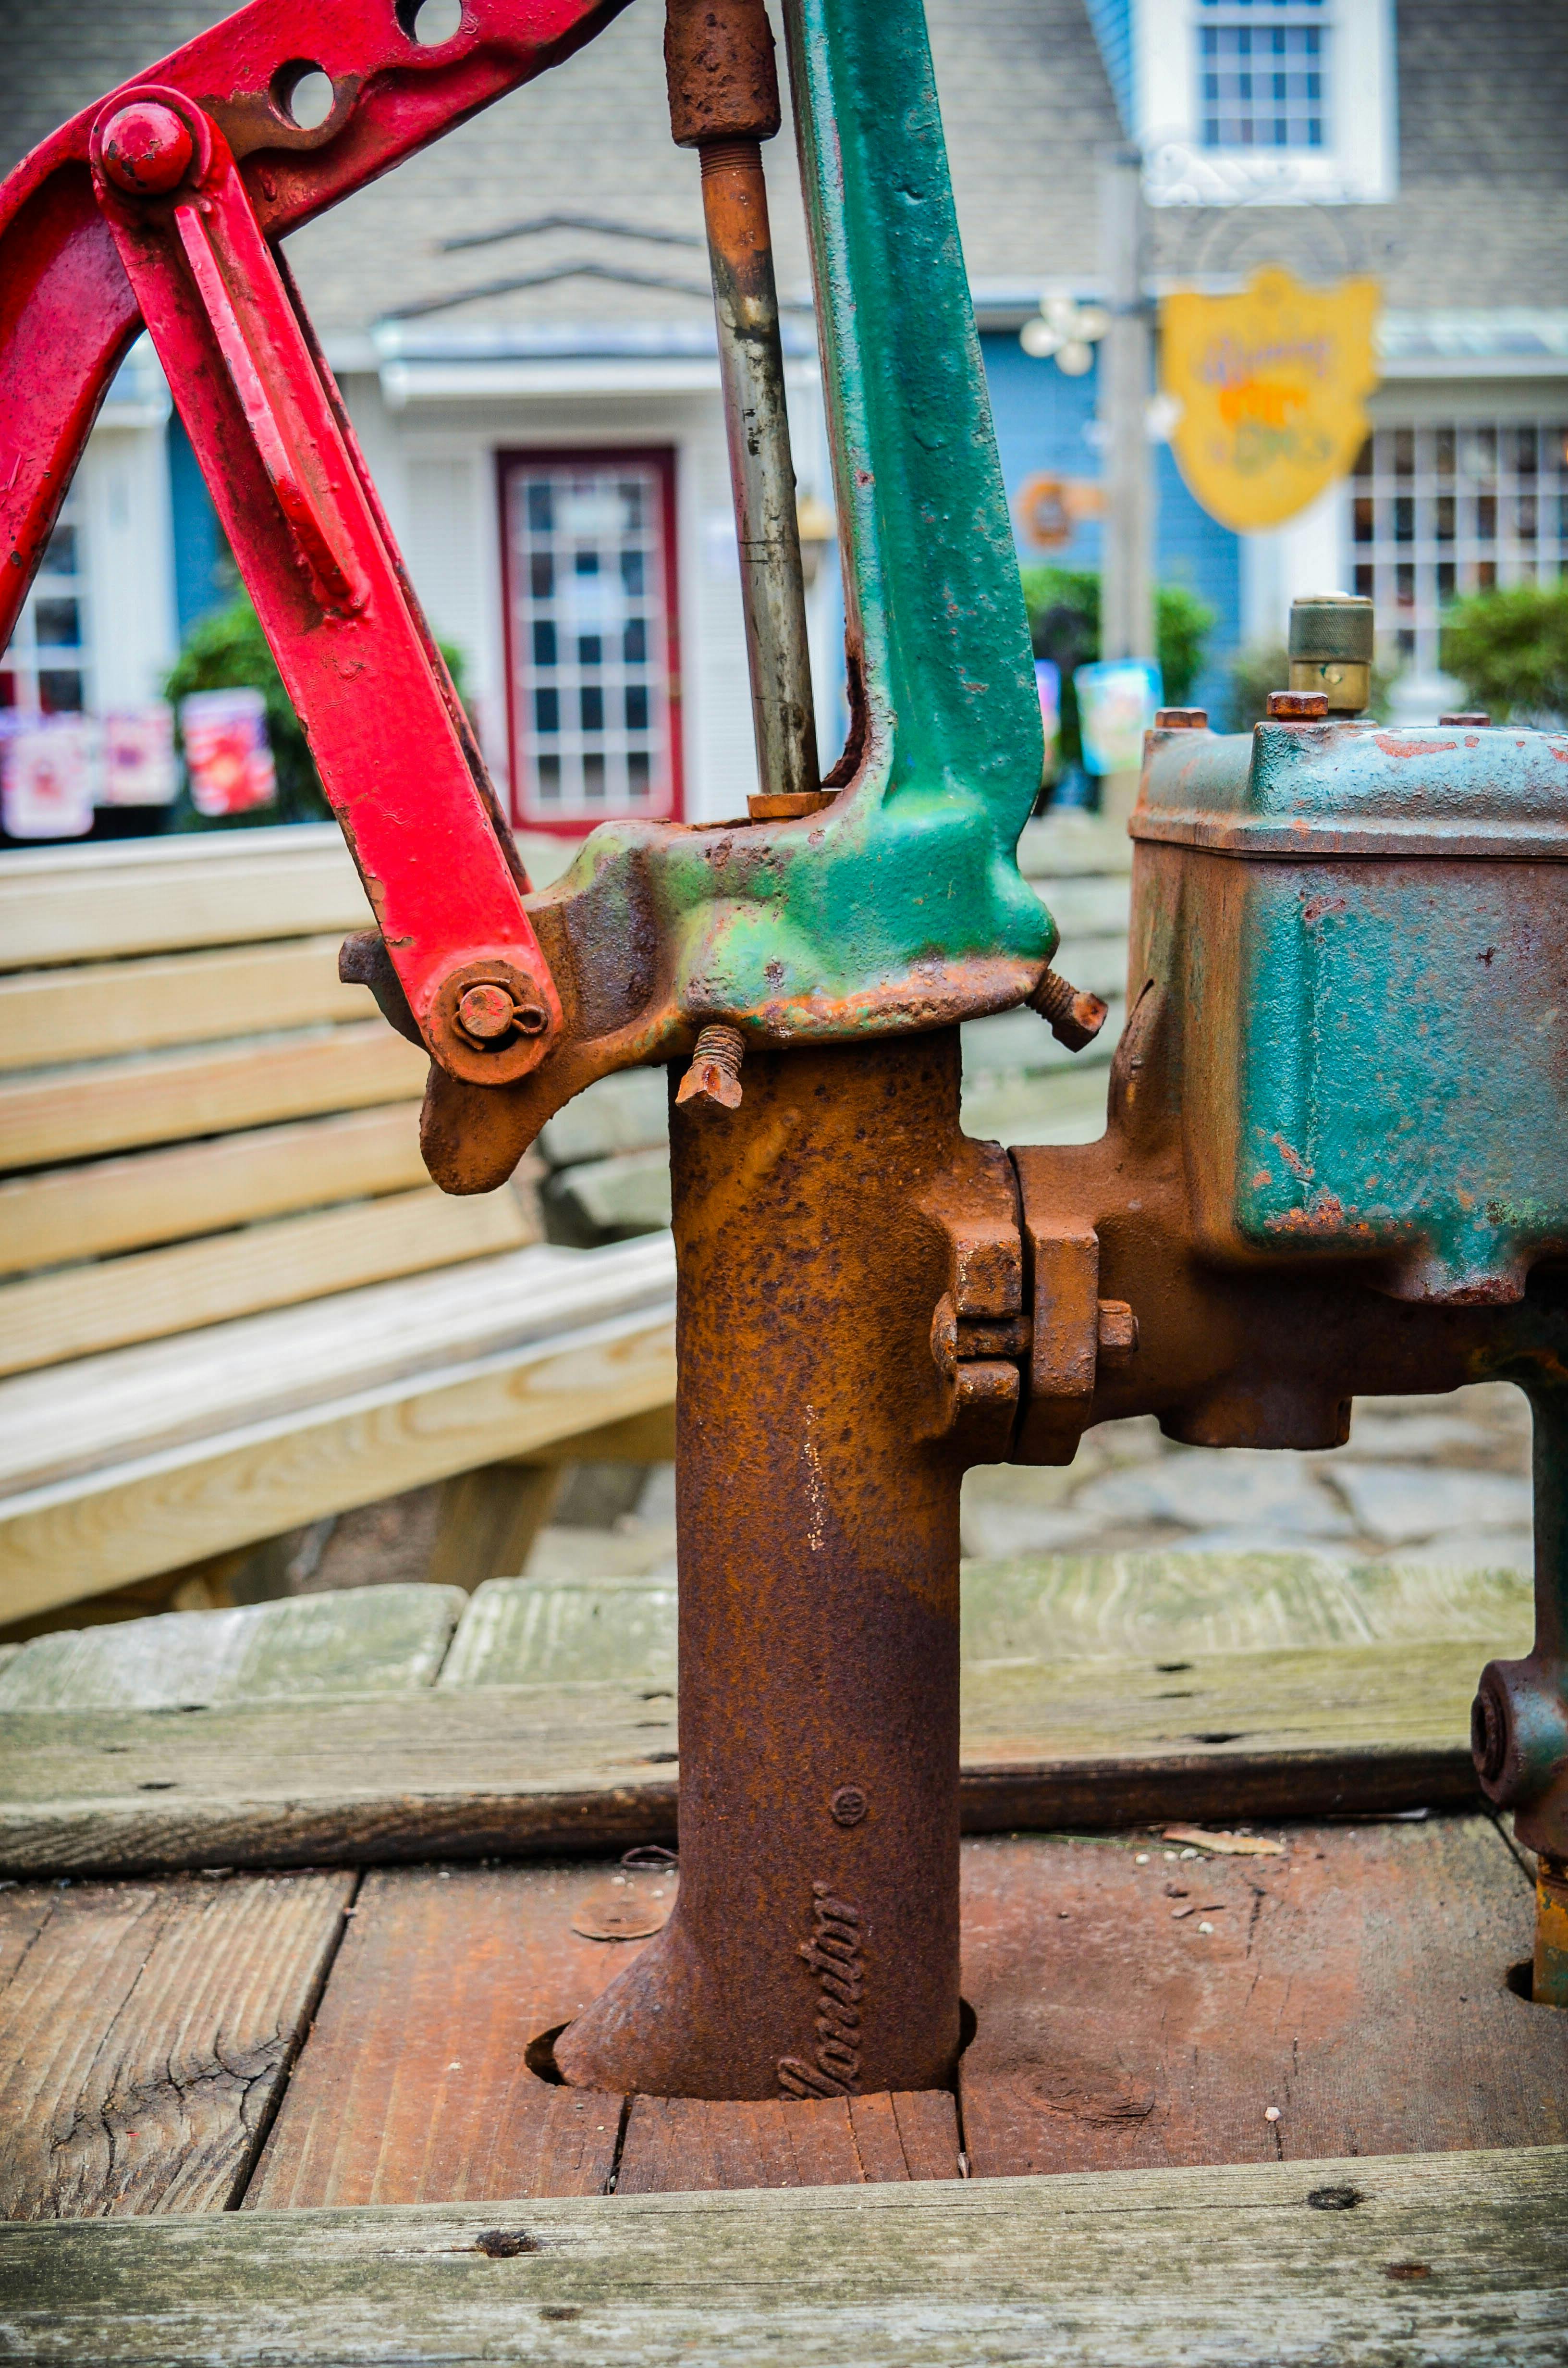 Free stock photo of old, vintage, water pump